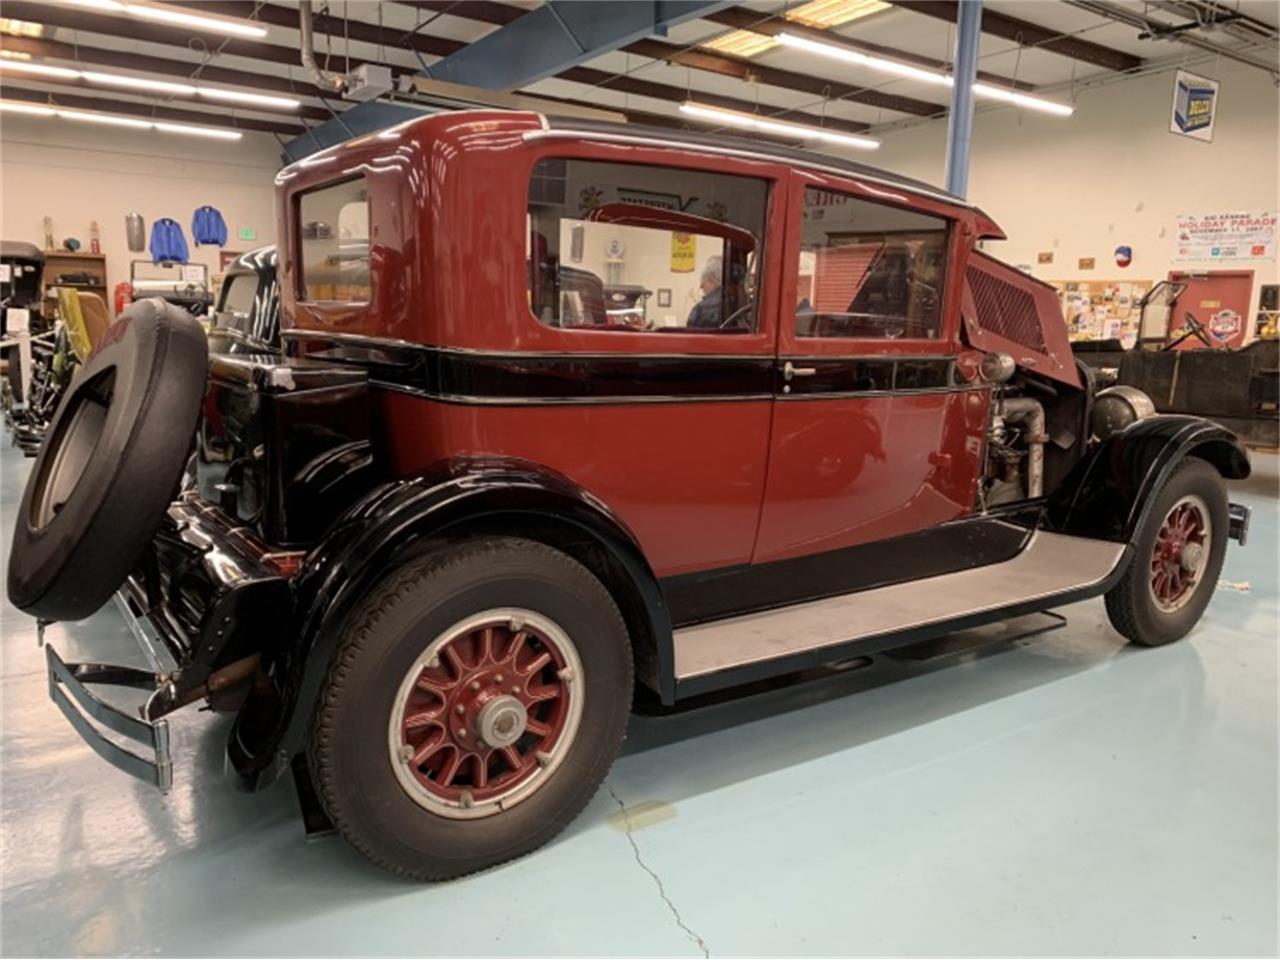 For Sale at Auction: 1927 Marmon Town Coupe for sale in Peoria, AZ